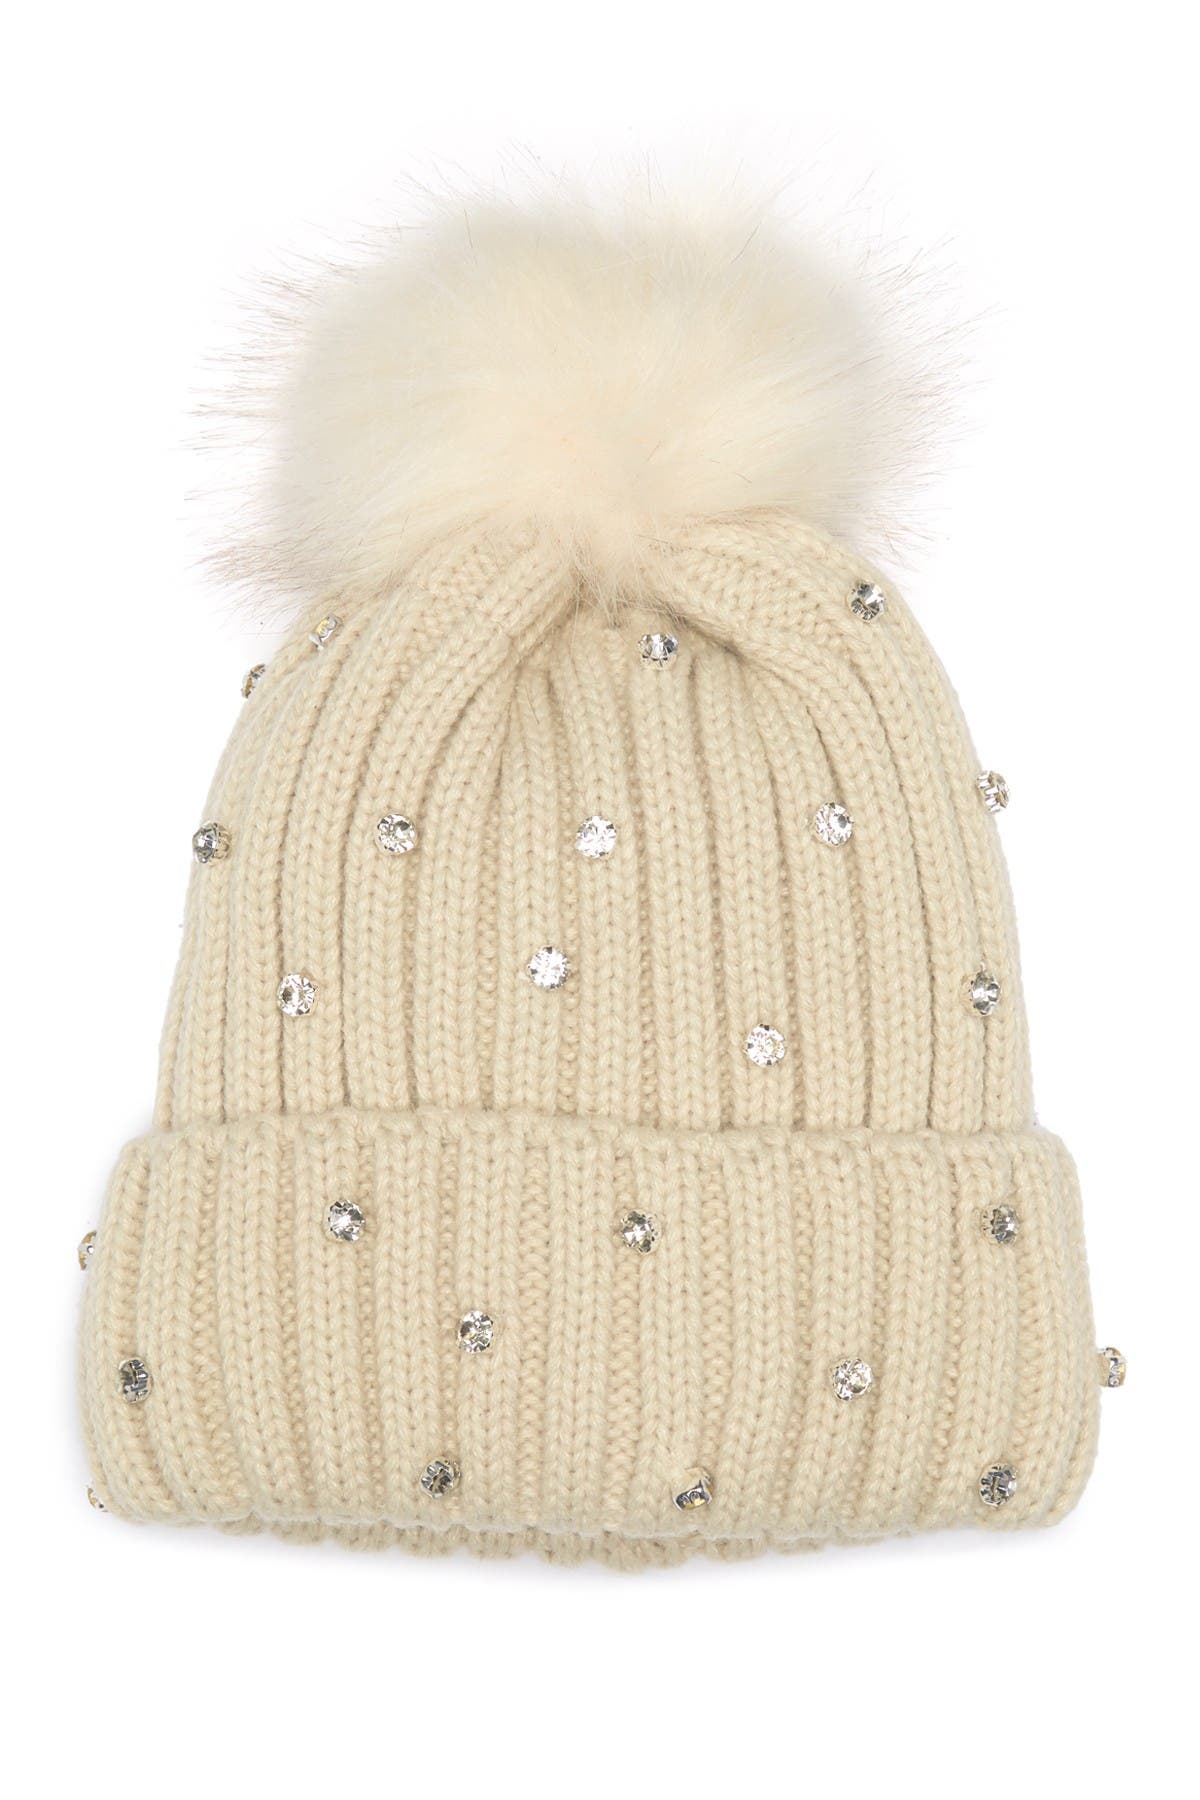 Cara Accessories Embellished Jewel Faux Fur Pom Beanie In Ivory